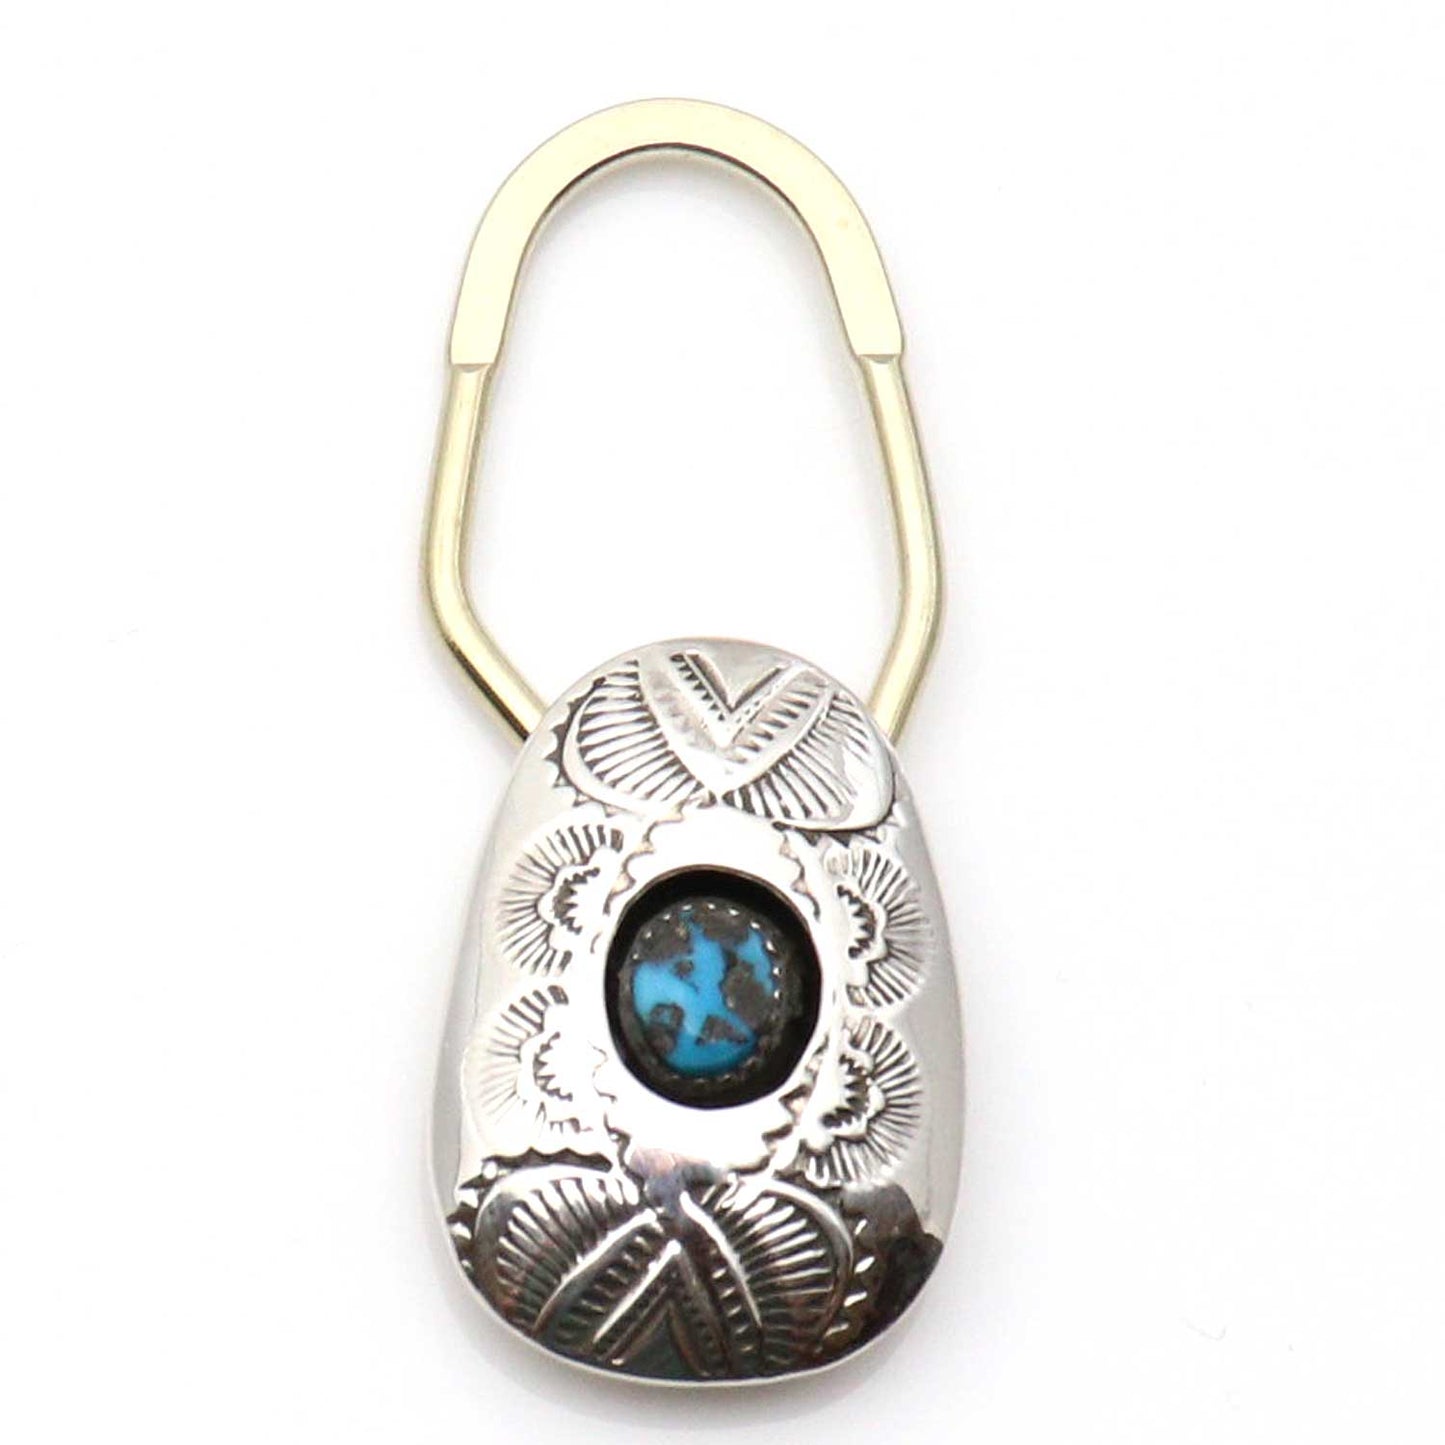 Turquoise Key Ring by Skeets